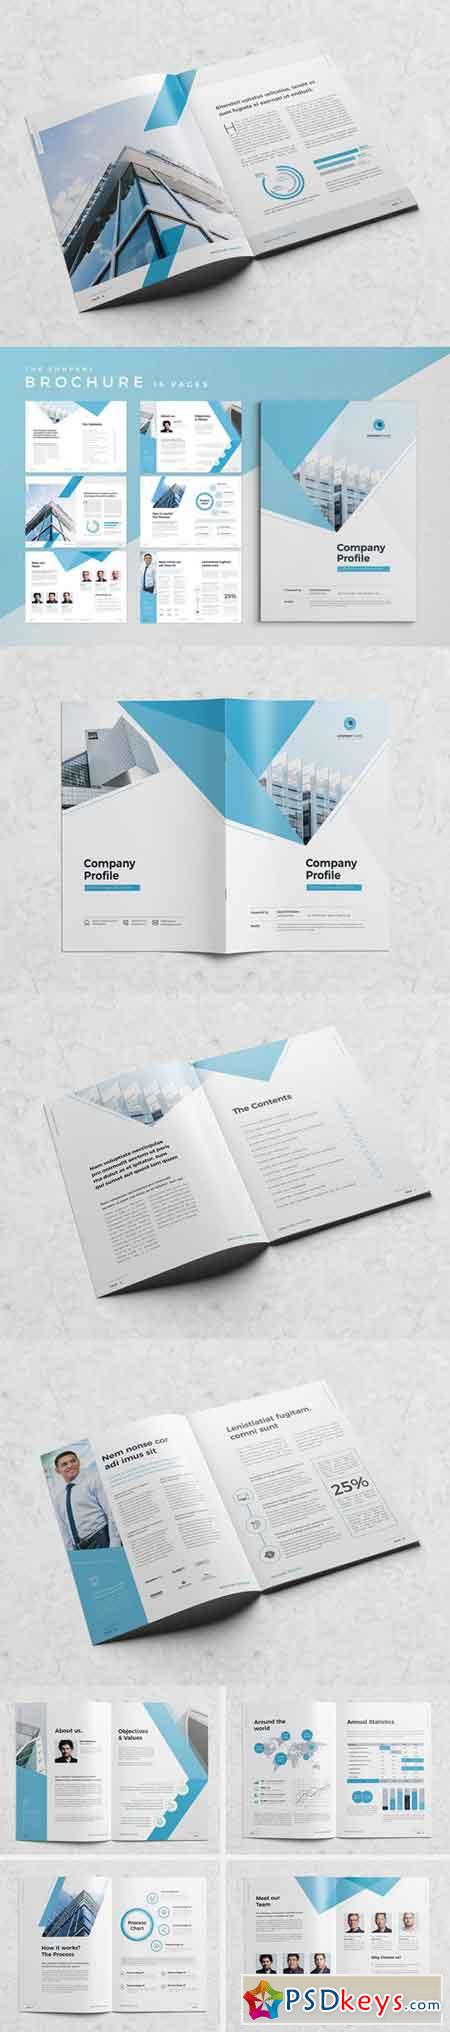 Minimal Company Profile 16 Pages